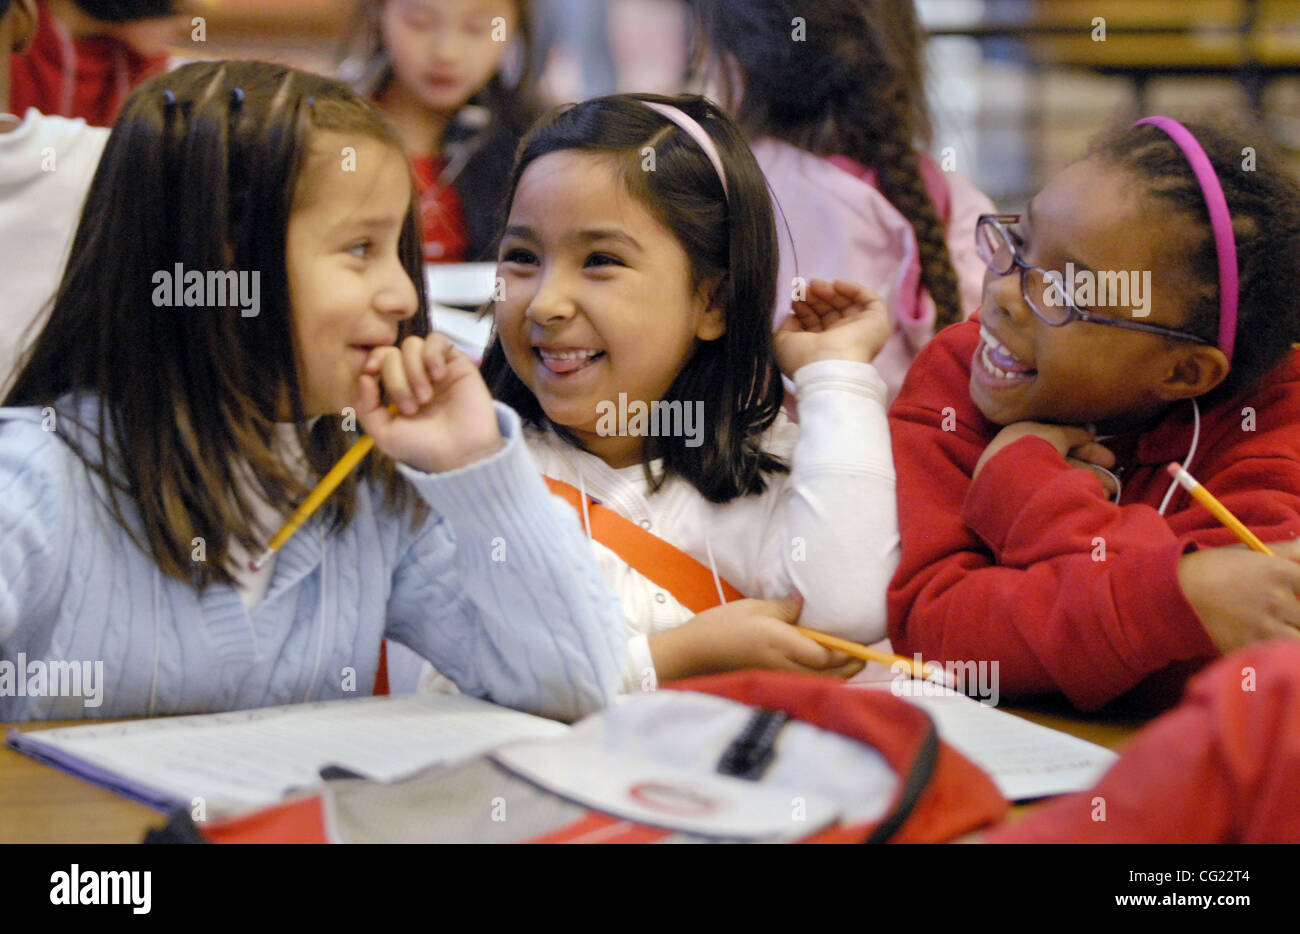 LEDE From left, Joanna Pardo-Lopez (cq), 6, Melissa Hernandez (cq), 6, and  Laniah Walker (cq), 6, share some laughs while doing their homework at  Camelia Basic Elementary School's new after school program,